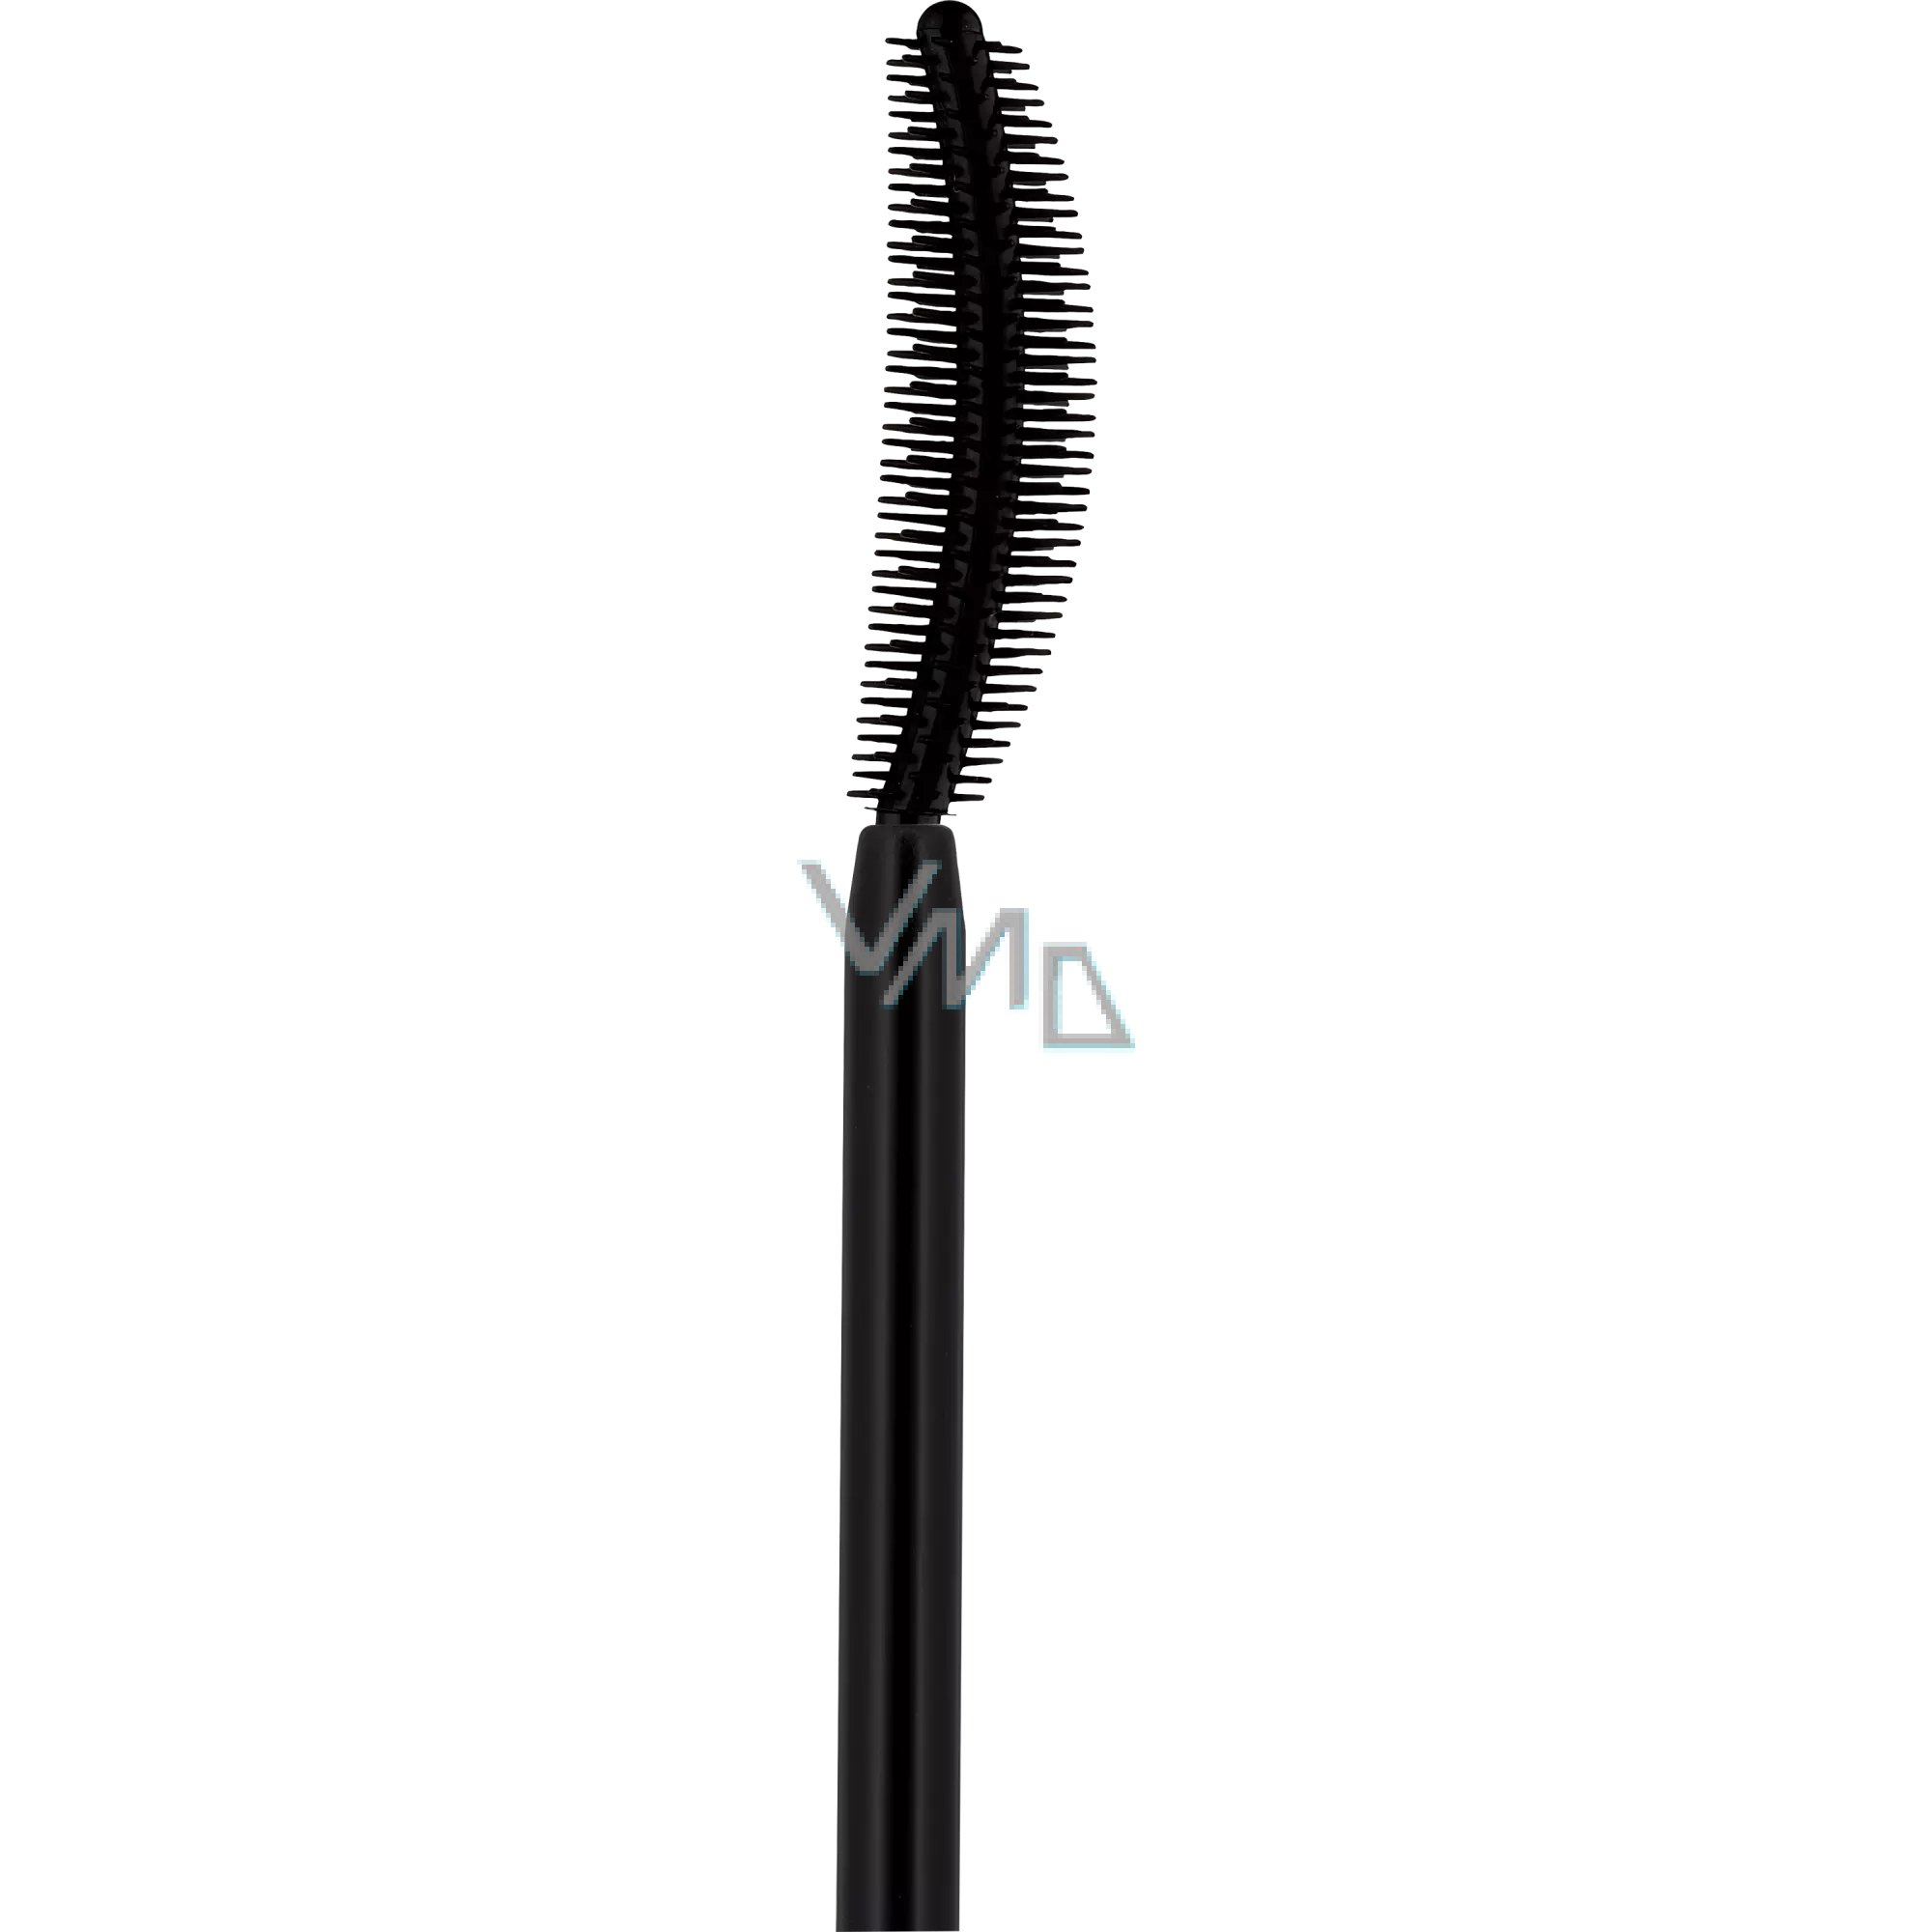 Like Curl drogerie Lift a - curl 9.5 & - Essence Instant ml lashes and parfumerie lengthen to Boss VMD Mascara Lash